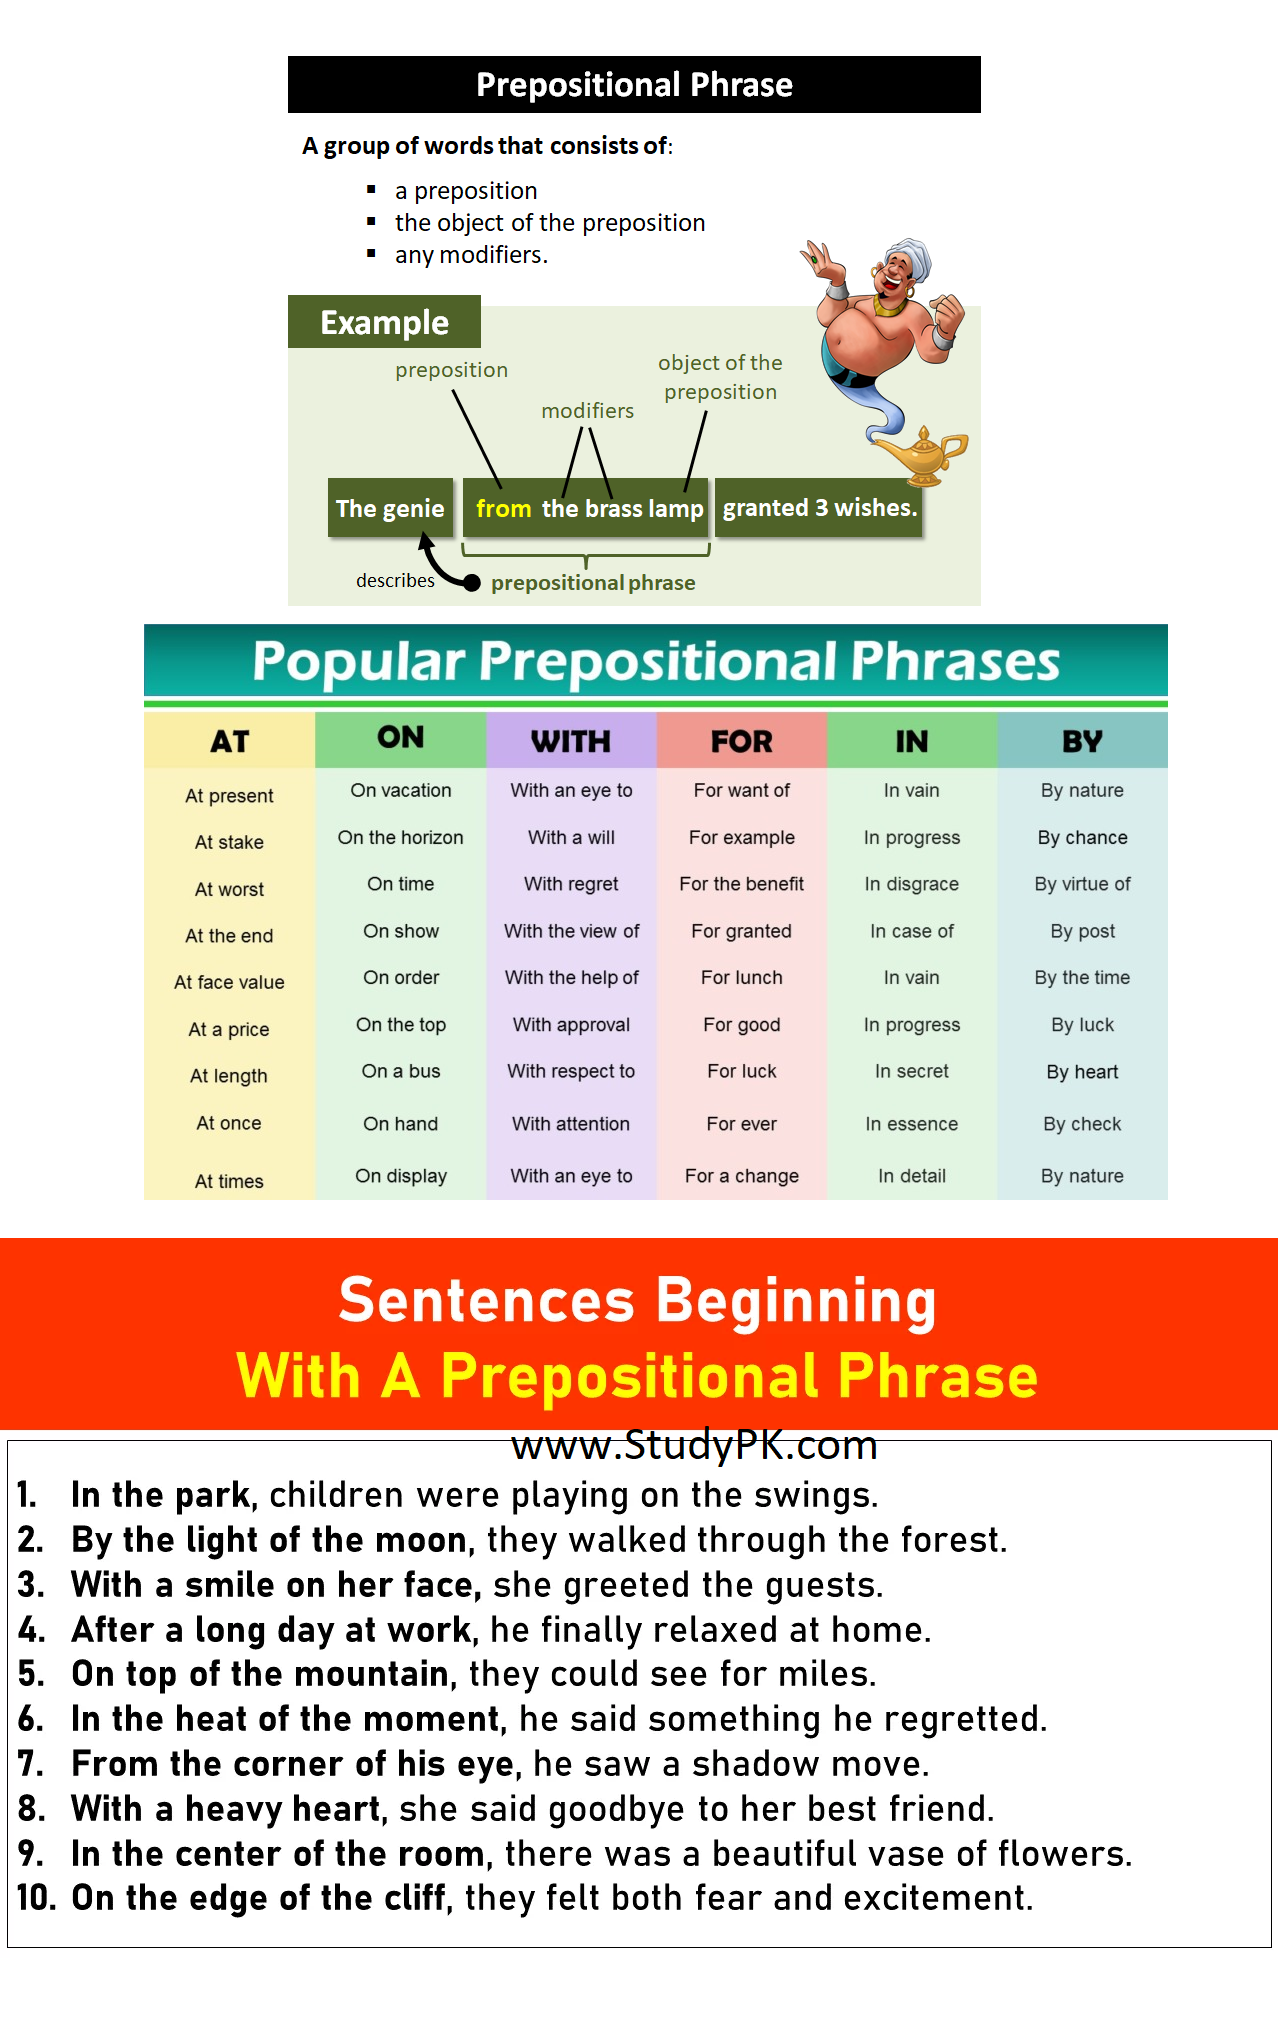 165+ H Words, Phrases, Sentences, & Paragraphs Grouped by Place